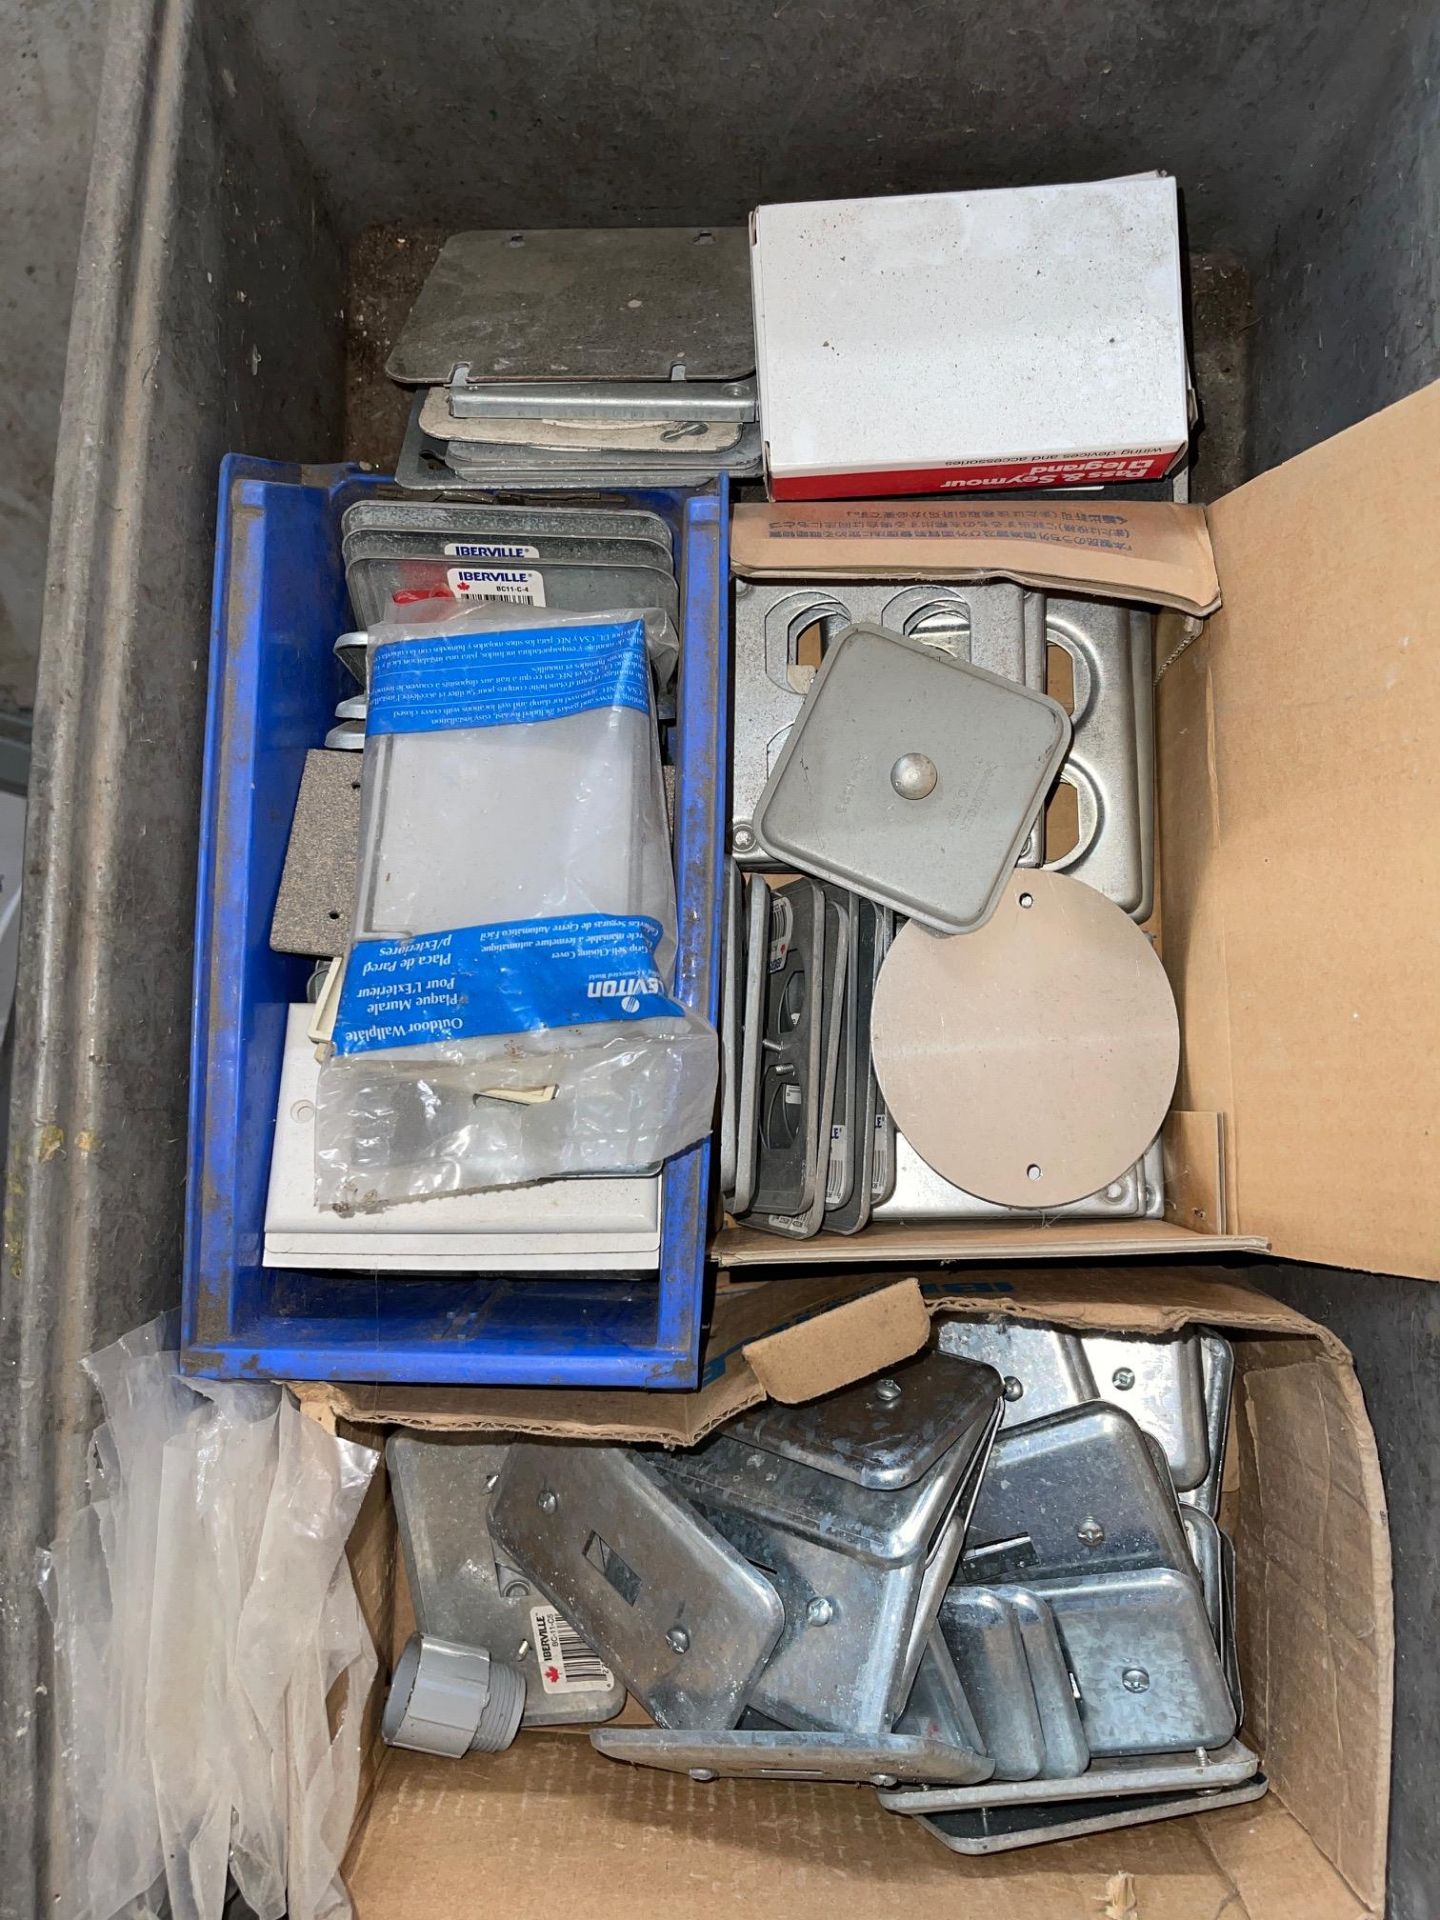 LOT OF ELECTRICAL BOXES, LIDS GALVANIZED, ALUMINUM, 3 BOXES, APPROXIMATELY 100 PIECES, RIGGING - Image 4 of 4